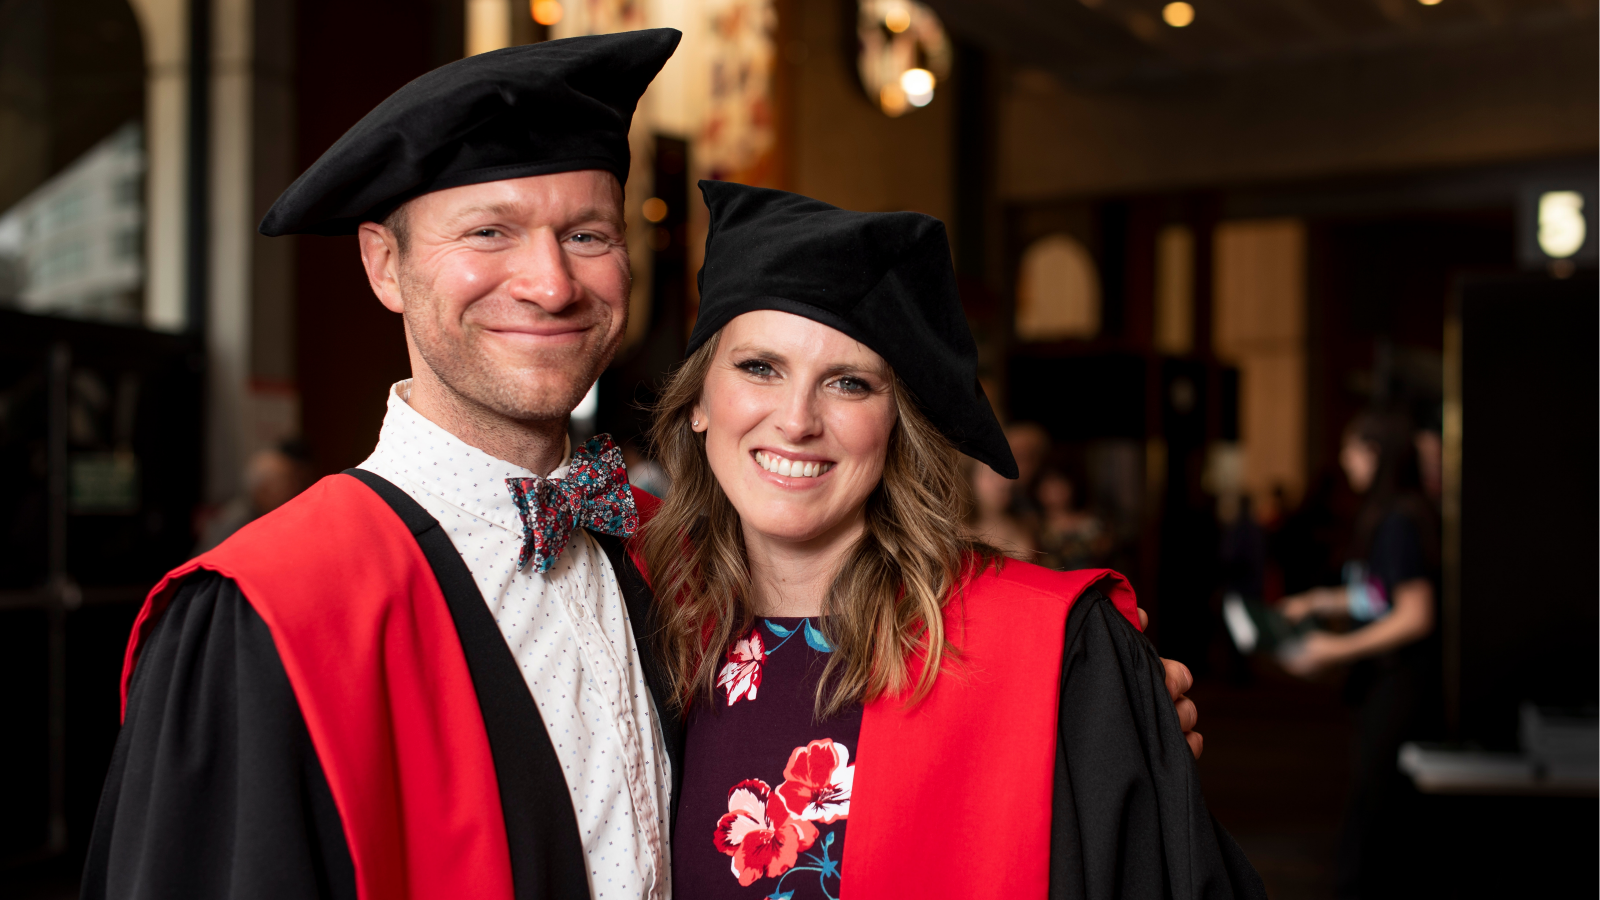 Male with bowtie in phD red robes, female with floral dress in PhD red robes